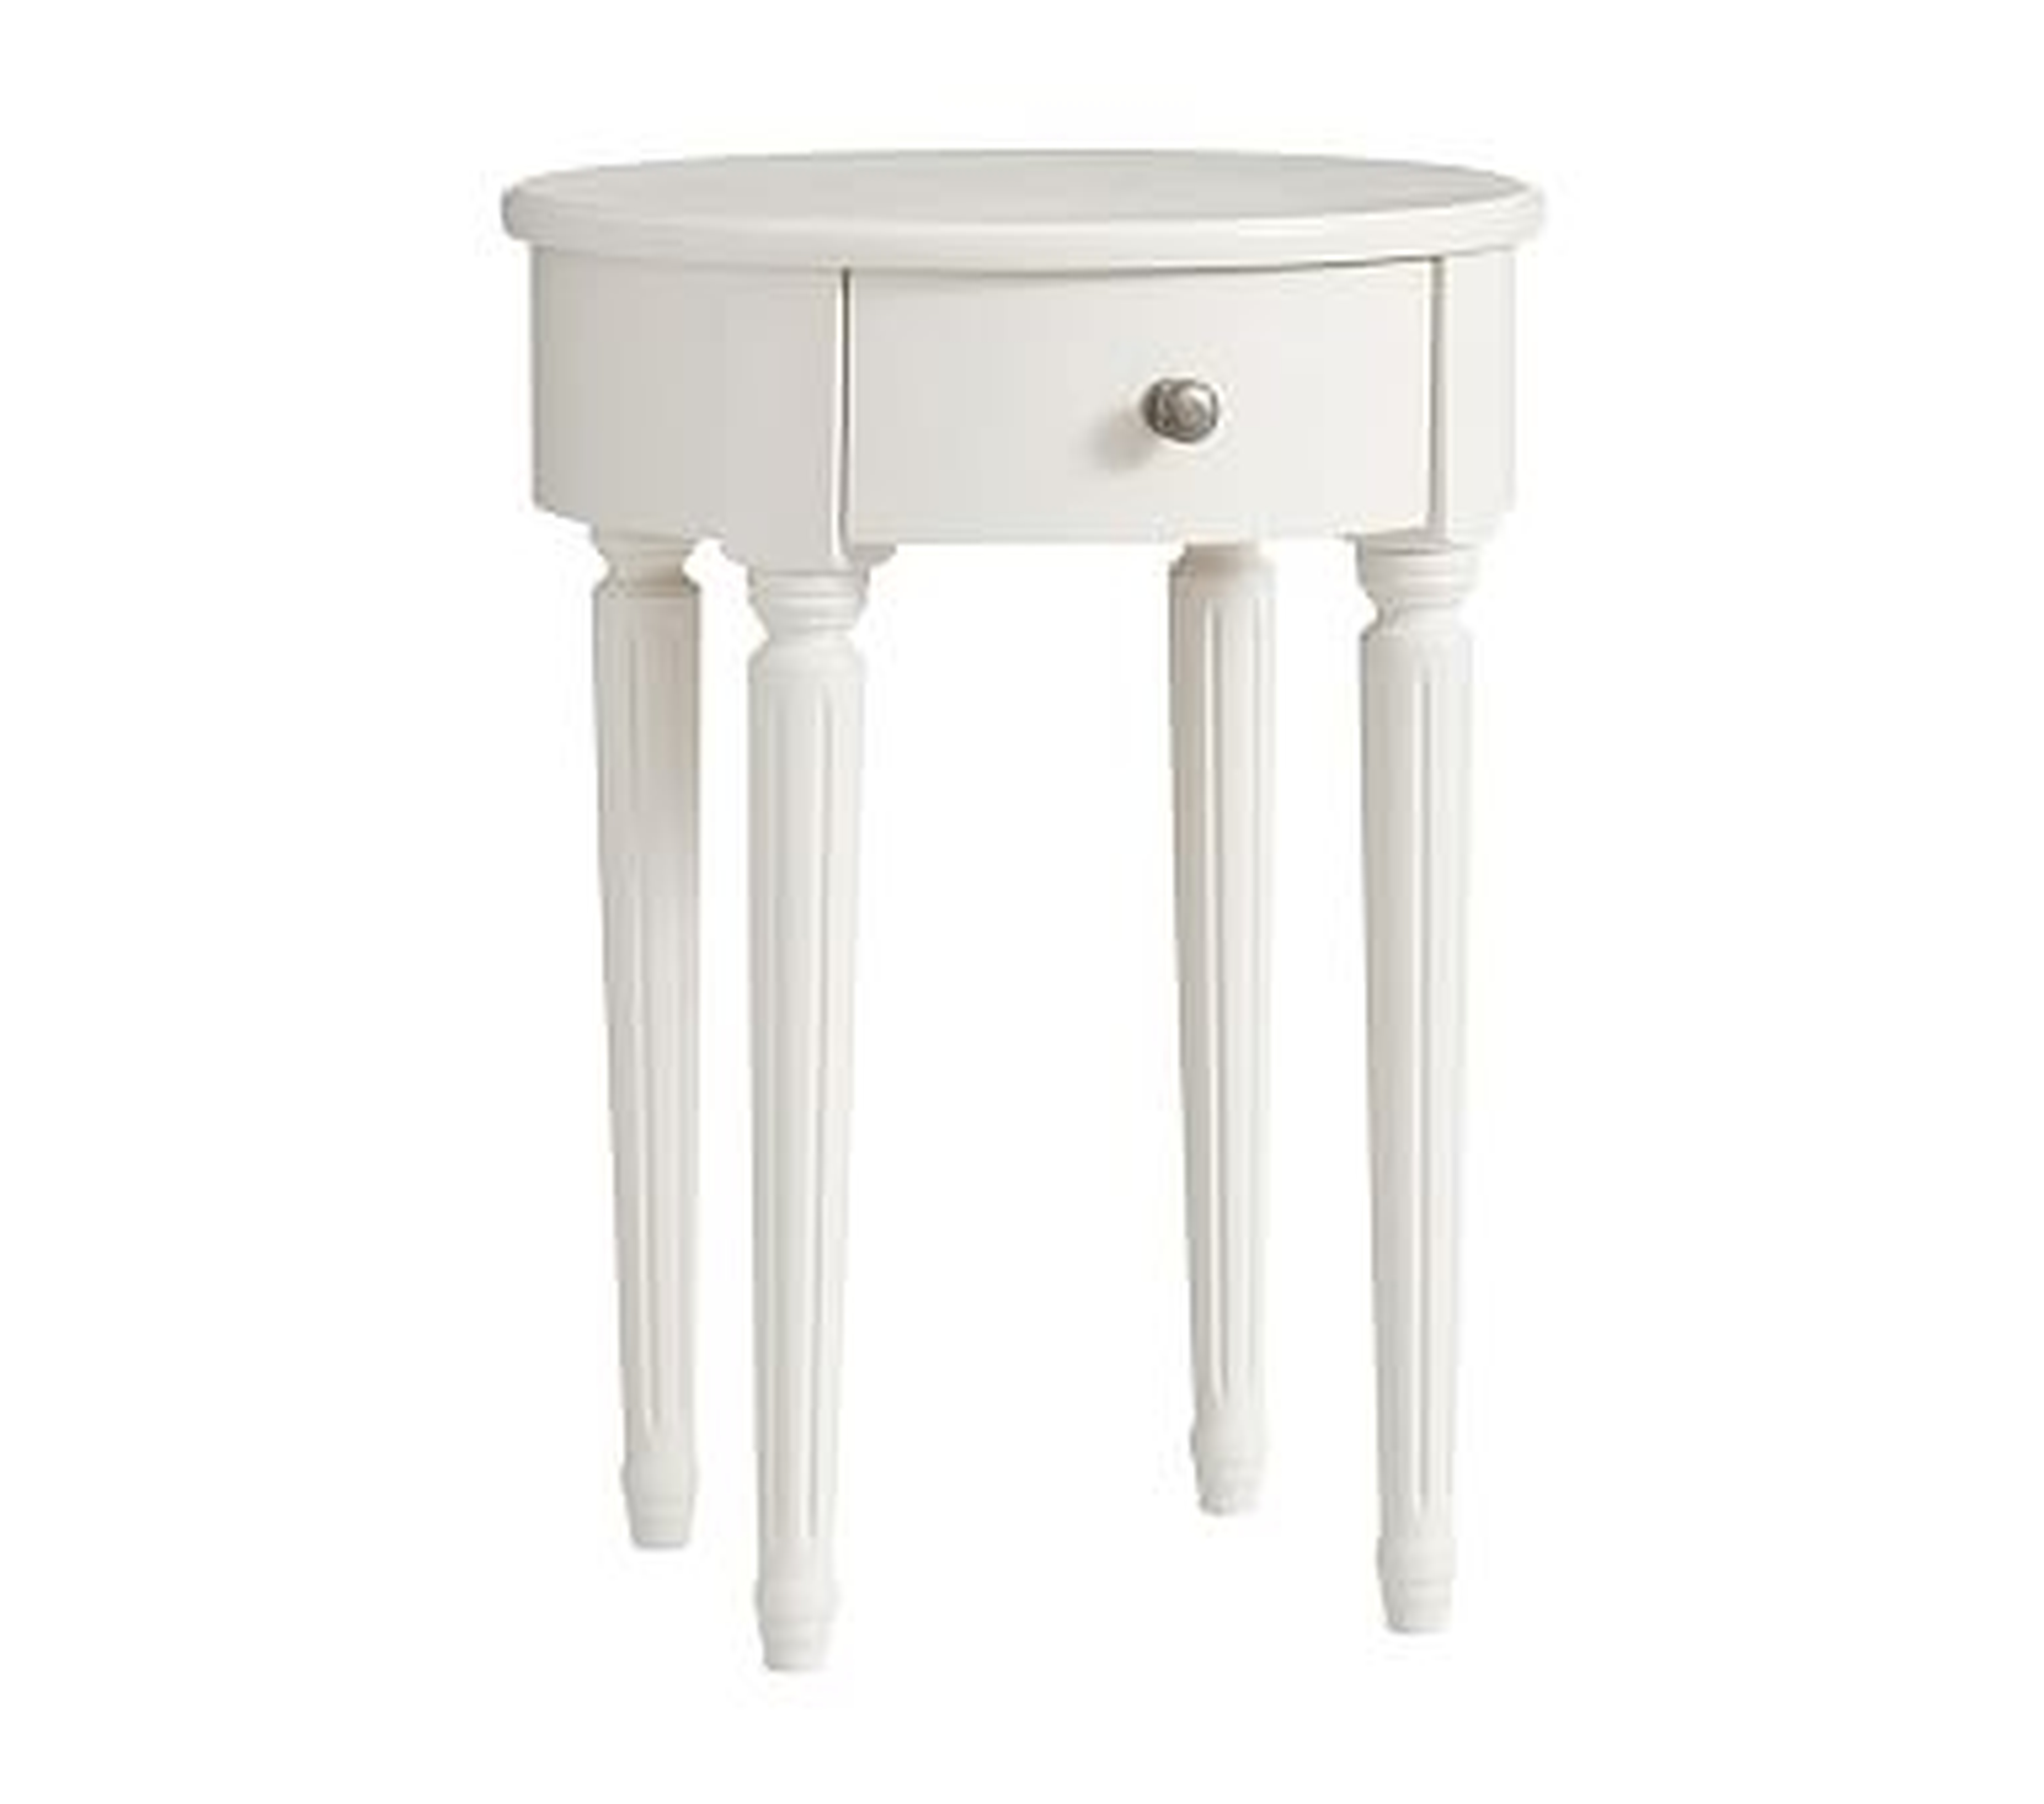 Blythe Round Side Table, French White - Pottery Barn Kids